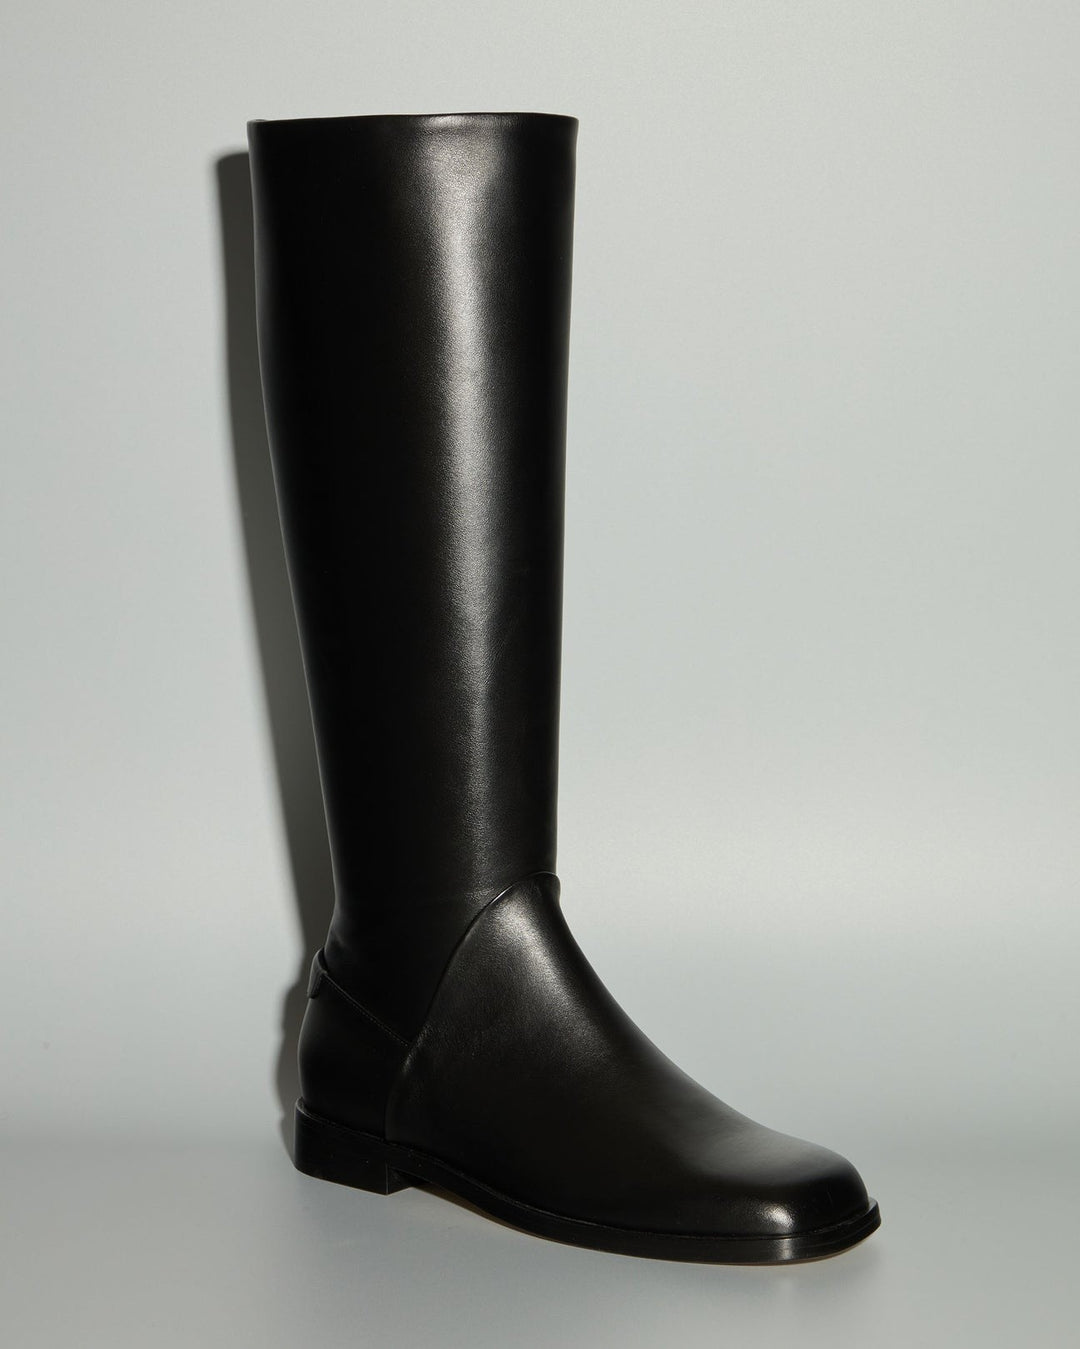 Hand-crafted in Italy with artisan precision, Jia draws on the equestrian boot with its chic knee-high silhouette and subtle seamwork. Promising enduring investment style, our buffed and beautifully supple black calfskin leather takes the spotlight here, while an internal zipper ensures a slim fit that will slip under dresses or trousers with ease.